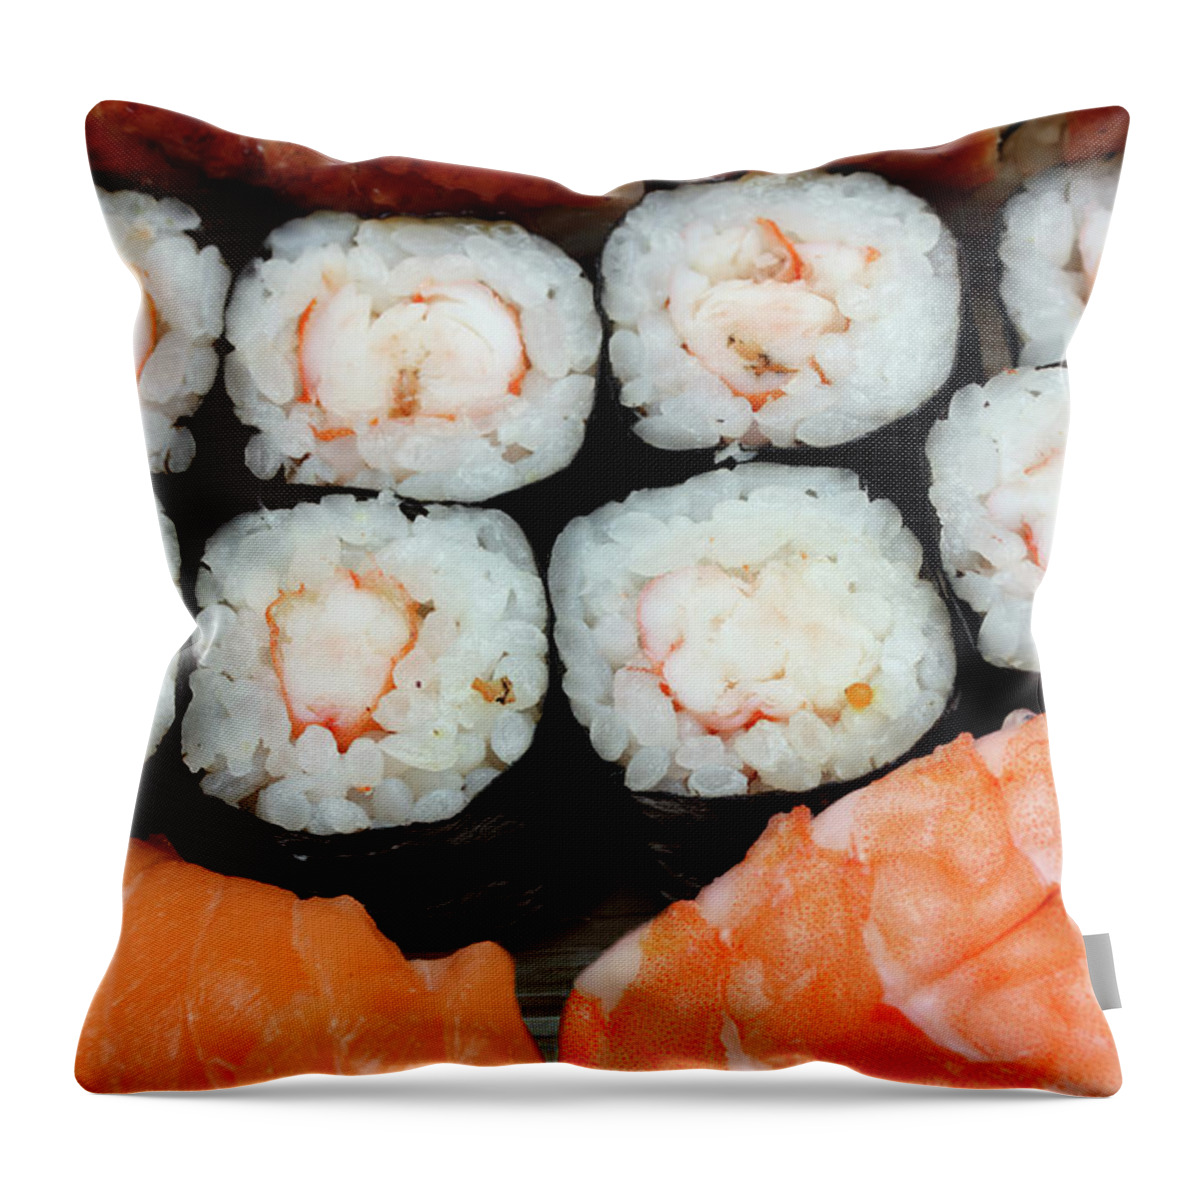 Roll Throw Pillow featuring the photograph Set Of Rolls And Sushi by Mikhail Kokhanchikov